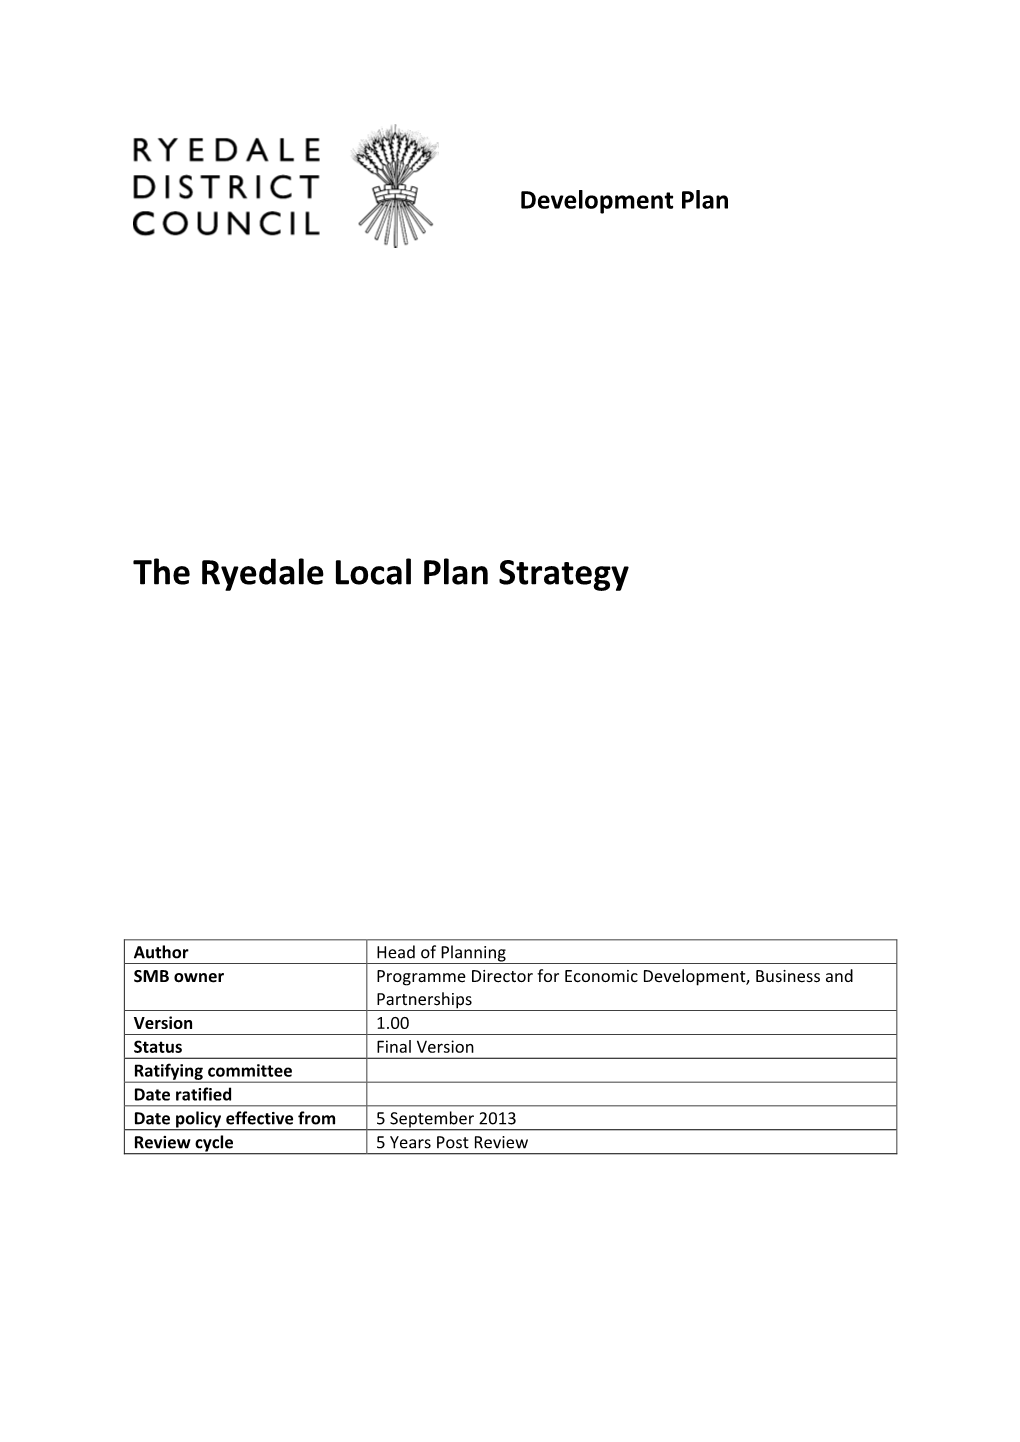 Ryedale Local Plan Strategy